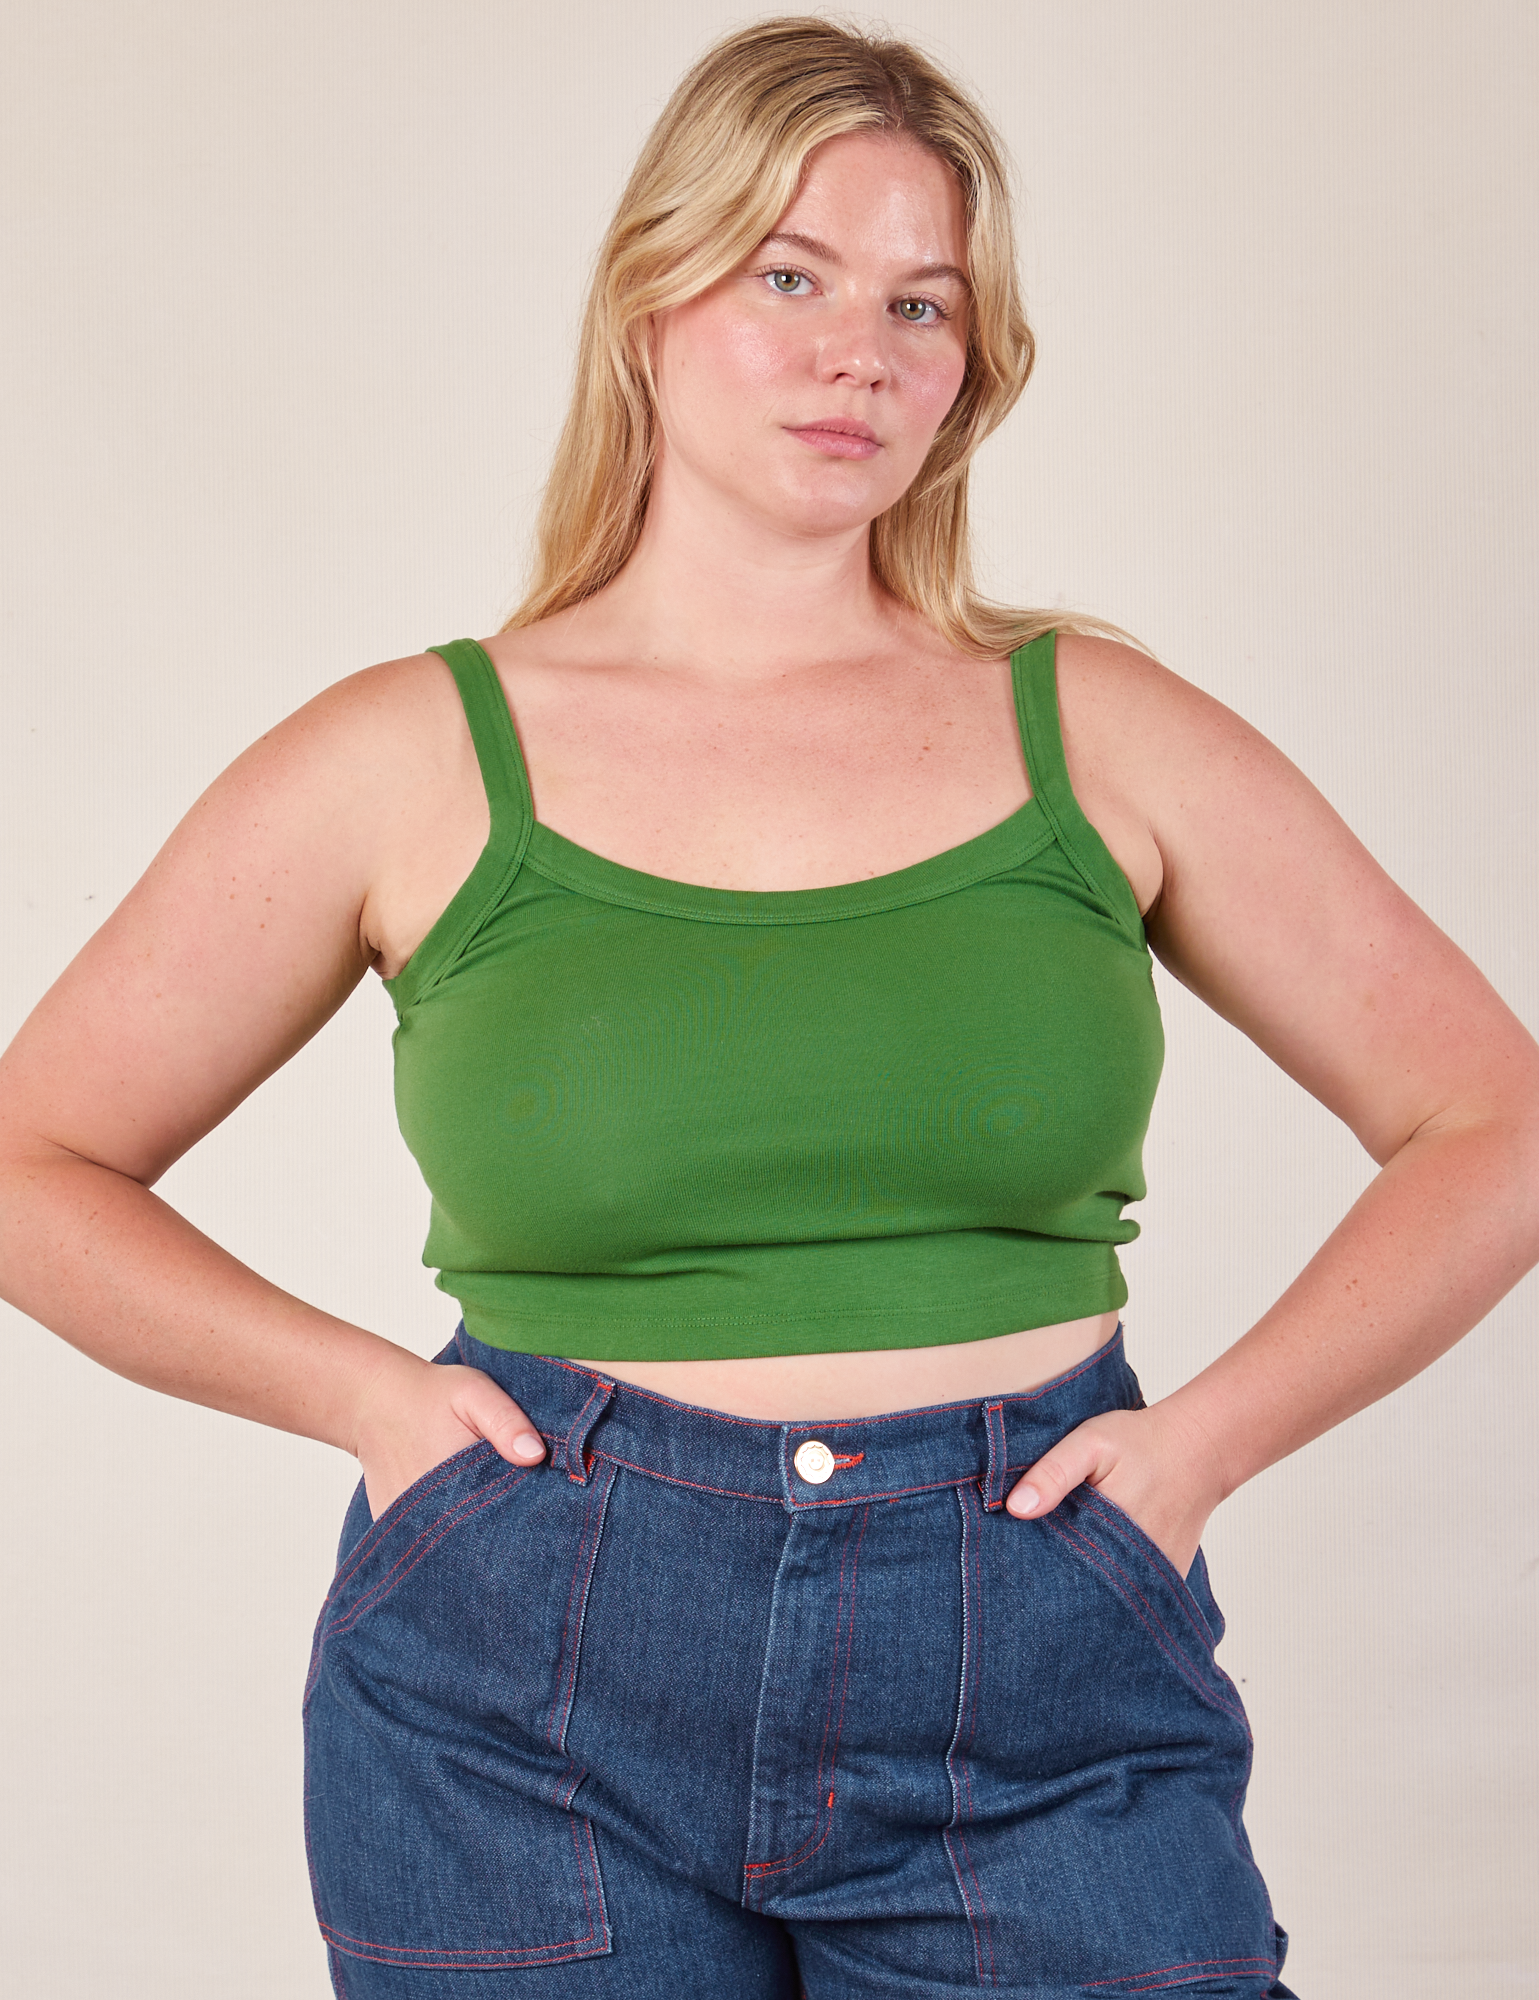 Lish is 5’8” and wearing M Cropped Cami in Lawn Green paired with dark wash Carpenter Jeans